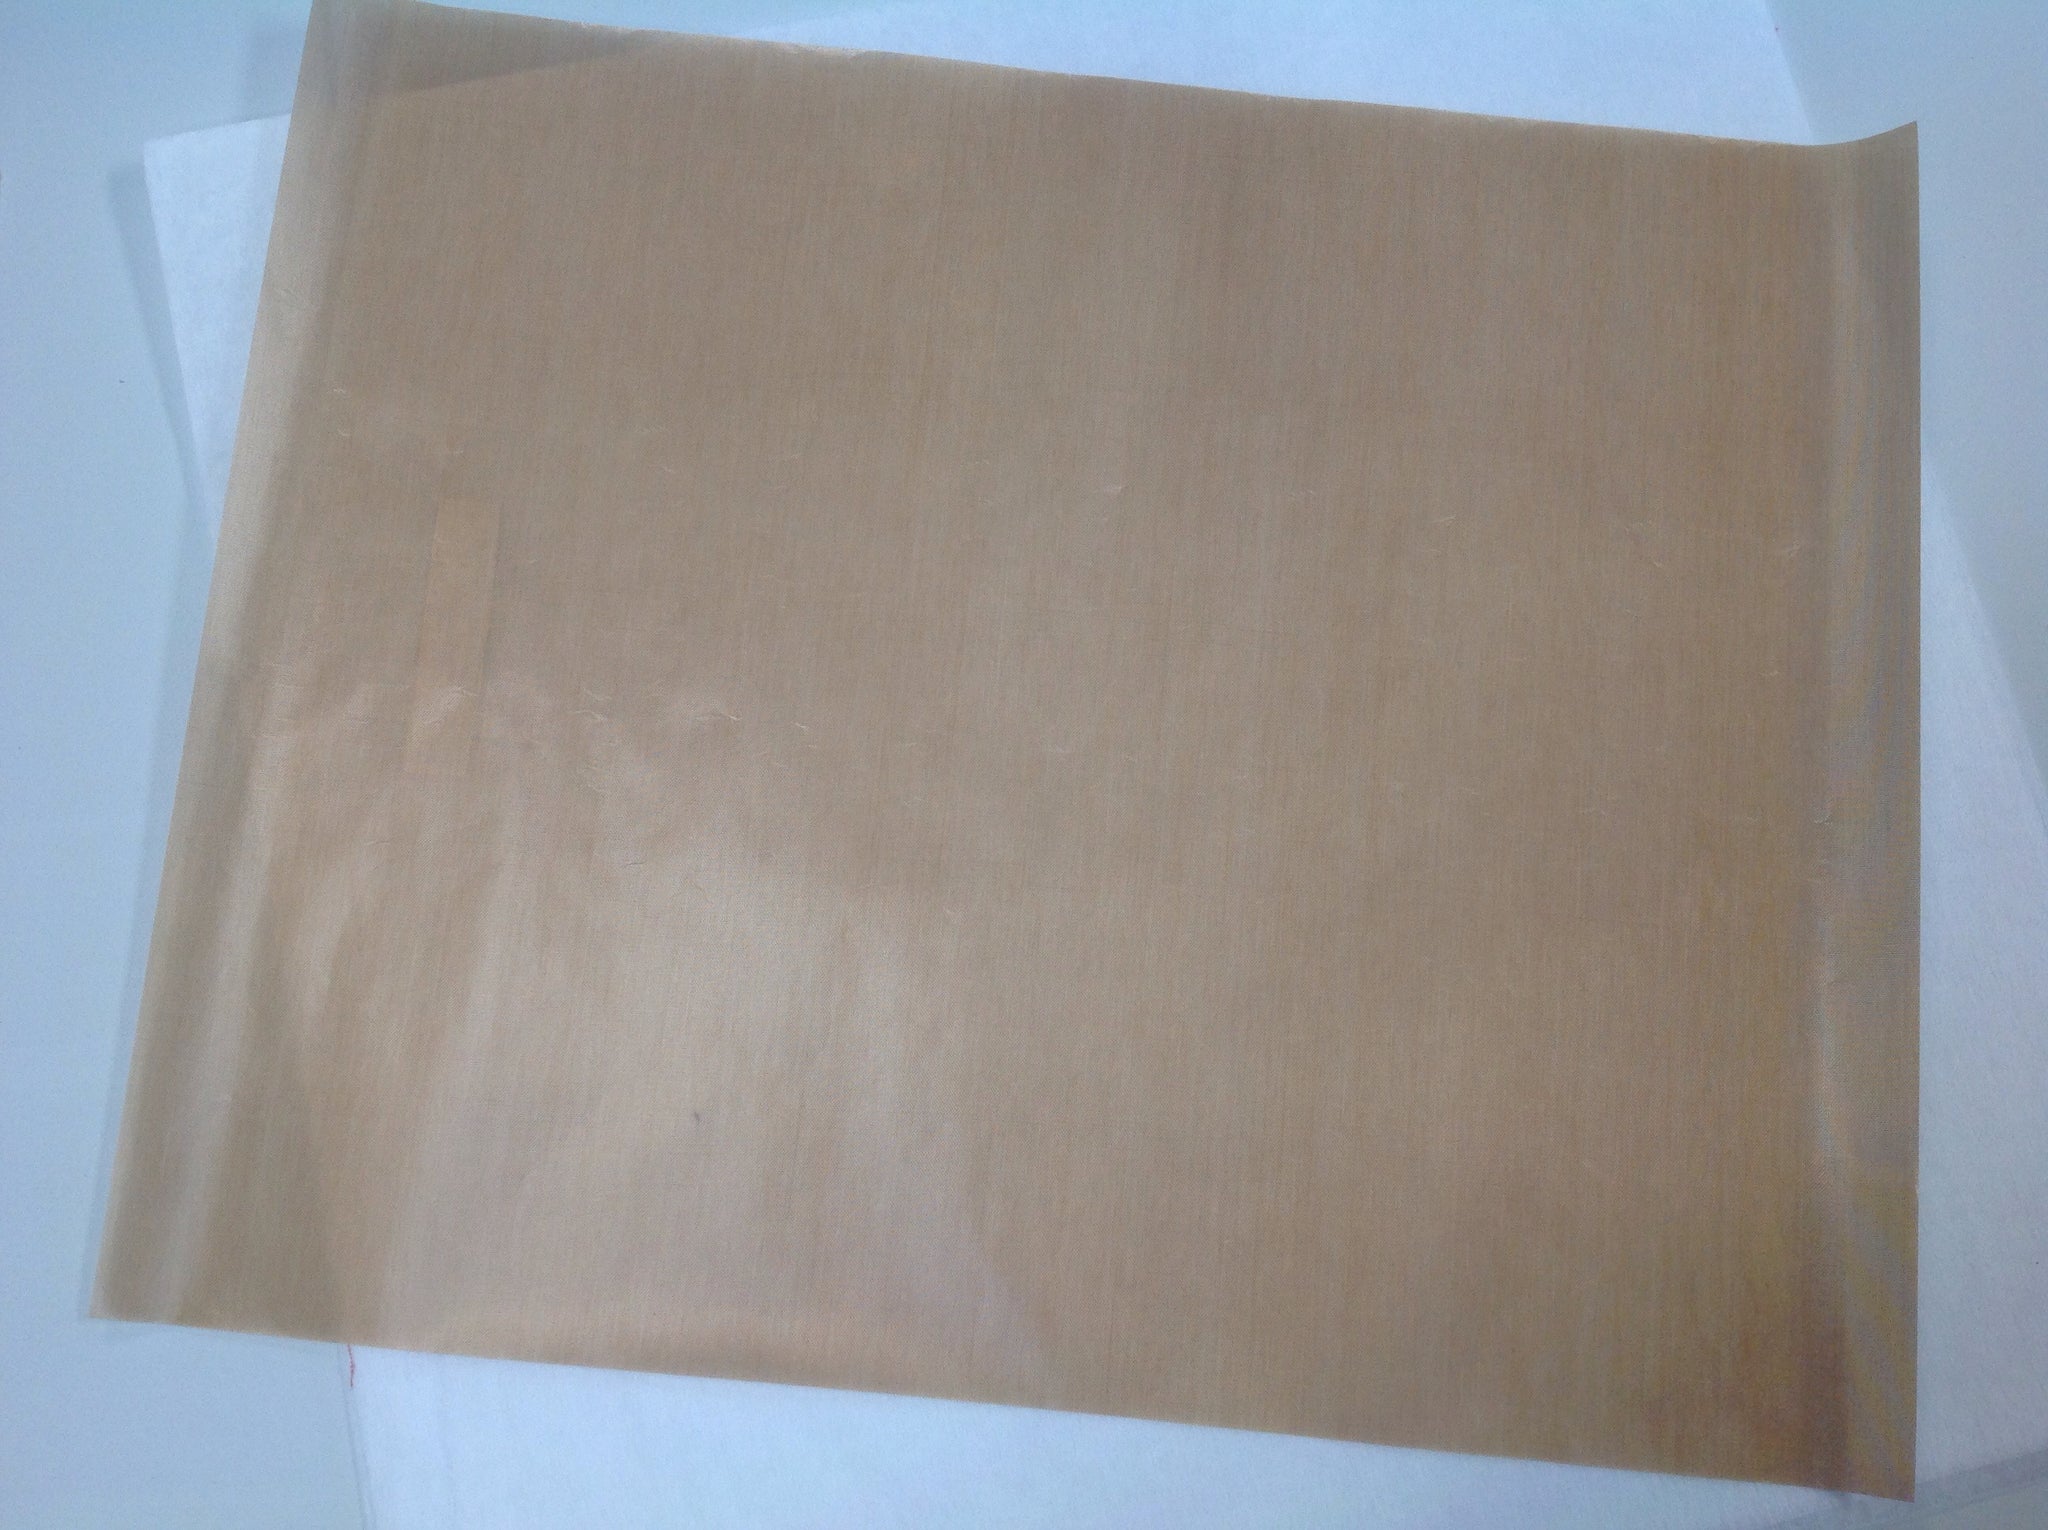 Teflon Sheet for Appliqué and Ironing